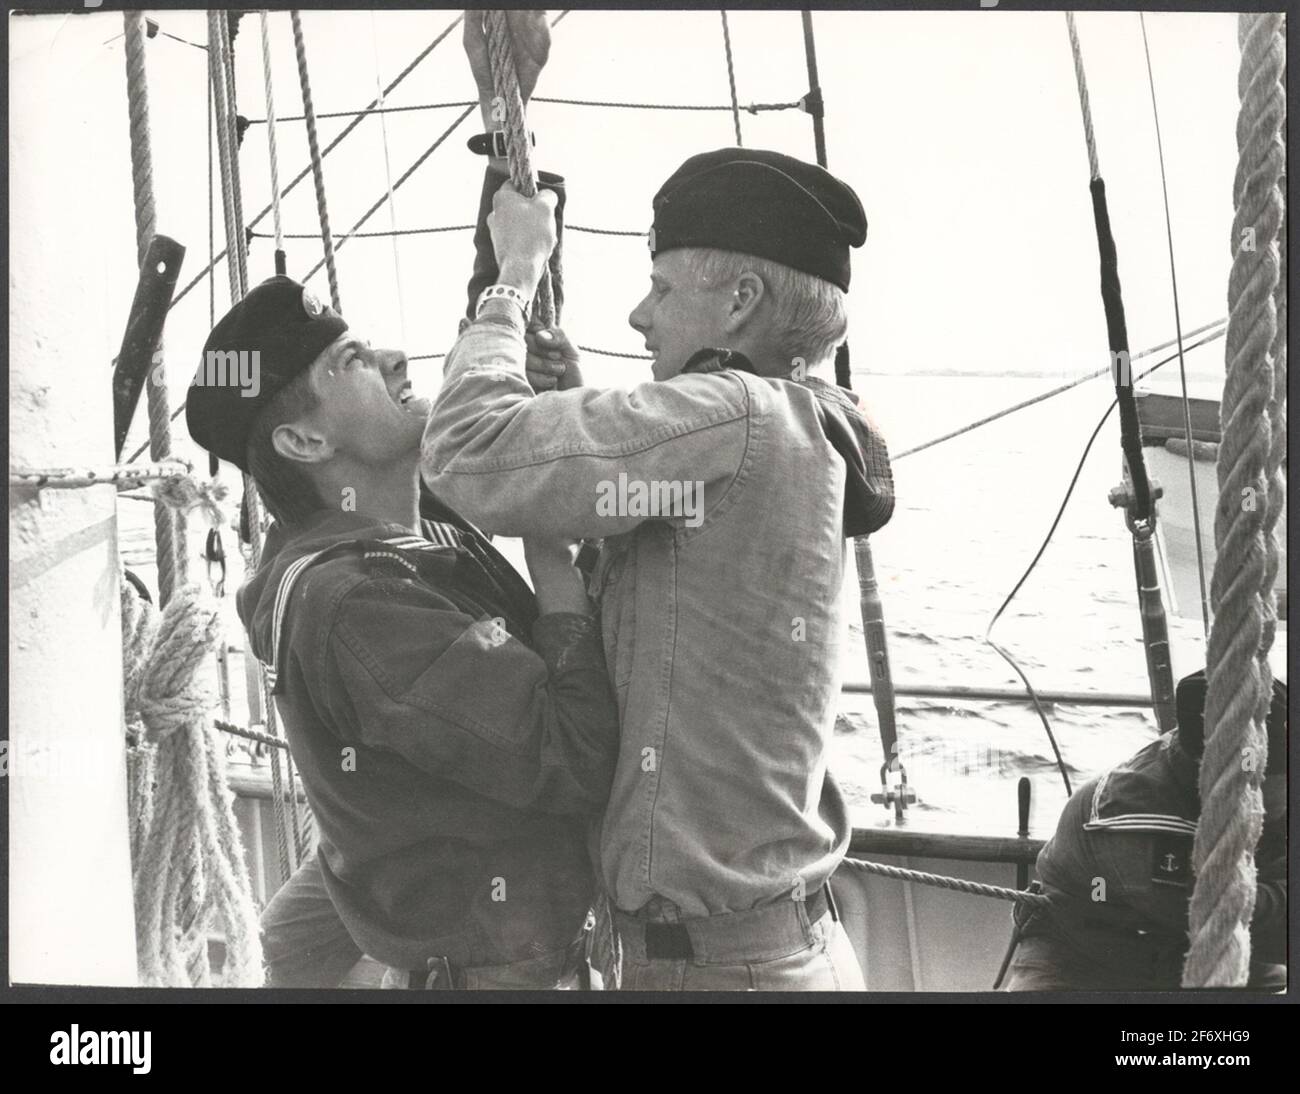 The picture shows two cadets on one of the marine school ships that are dragging on a rope or case.Probably it puts them a sail .. The picture shows two cadets on one of the marine school ships that are dragging on a rope or case.Likely to put them a sail. Stock Photo